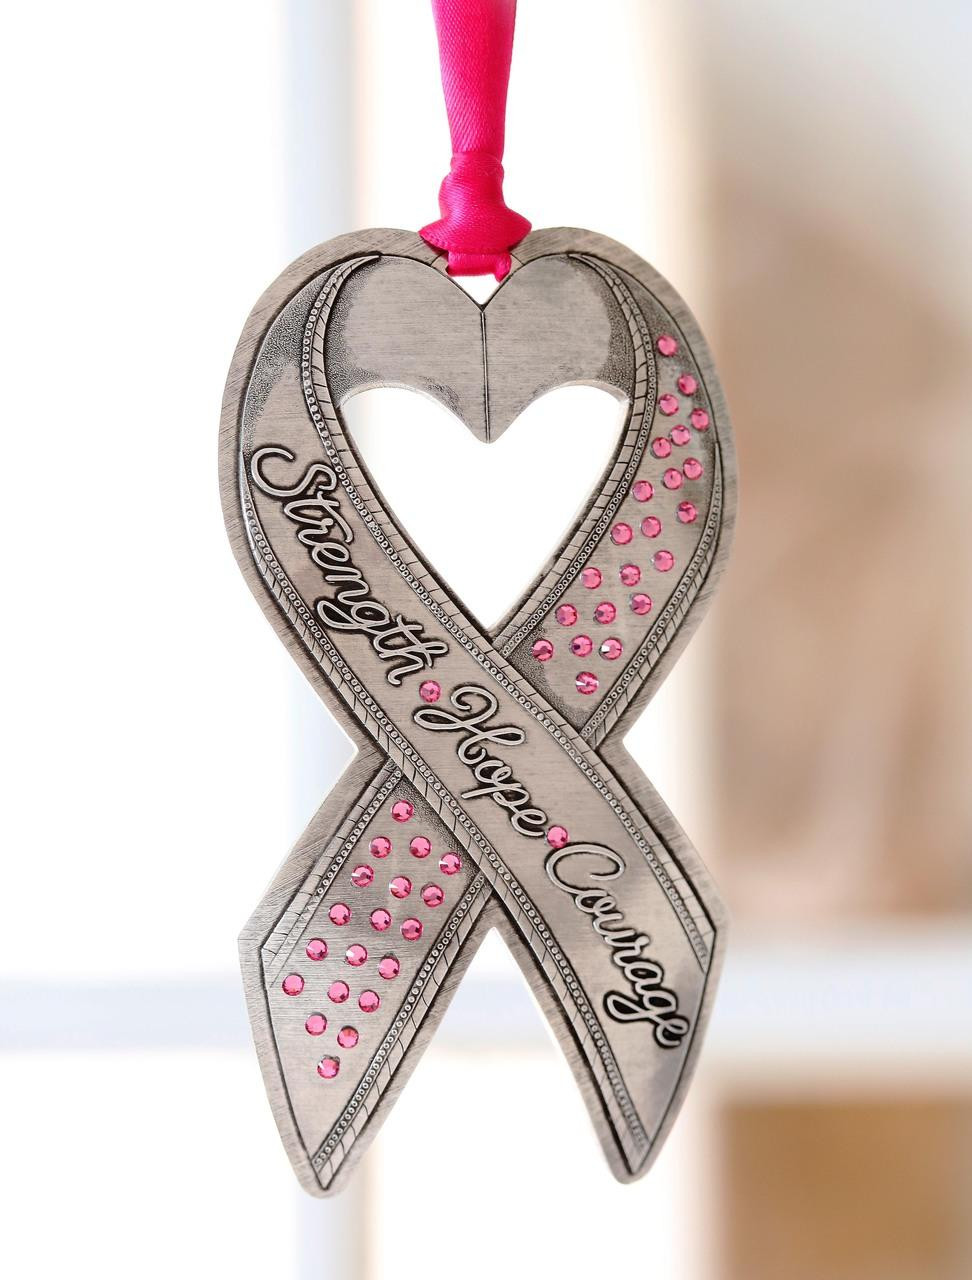 Breast Cancer Awareness Ribbon Ornament with Swarovski Crystals